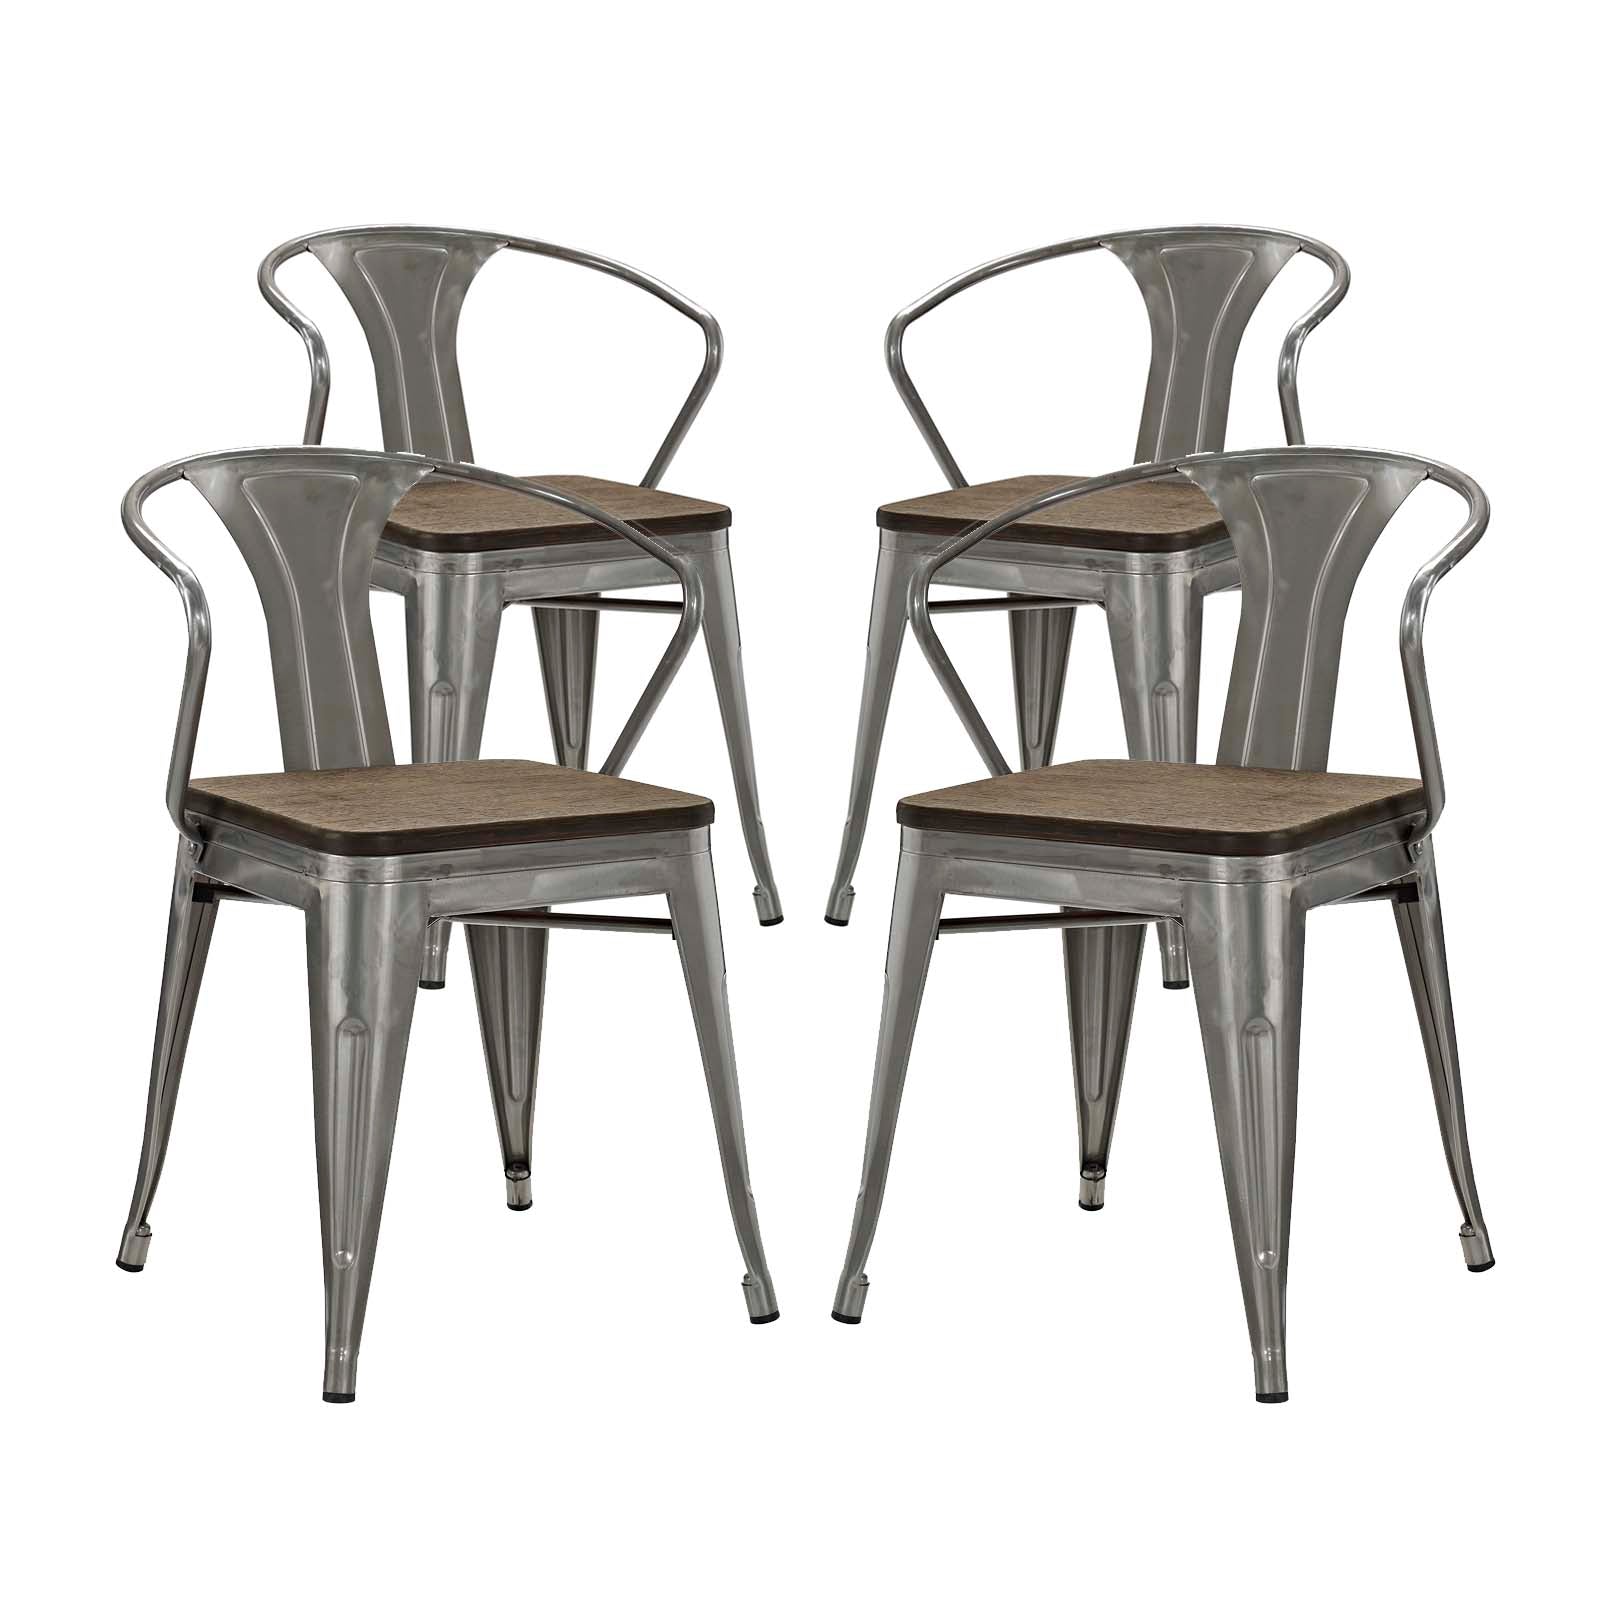 Promenade Bamboo Dining Chair Set of 4 - East Shore Modern Home Furnishings